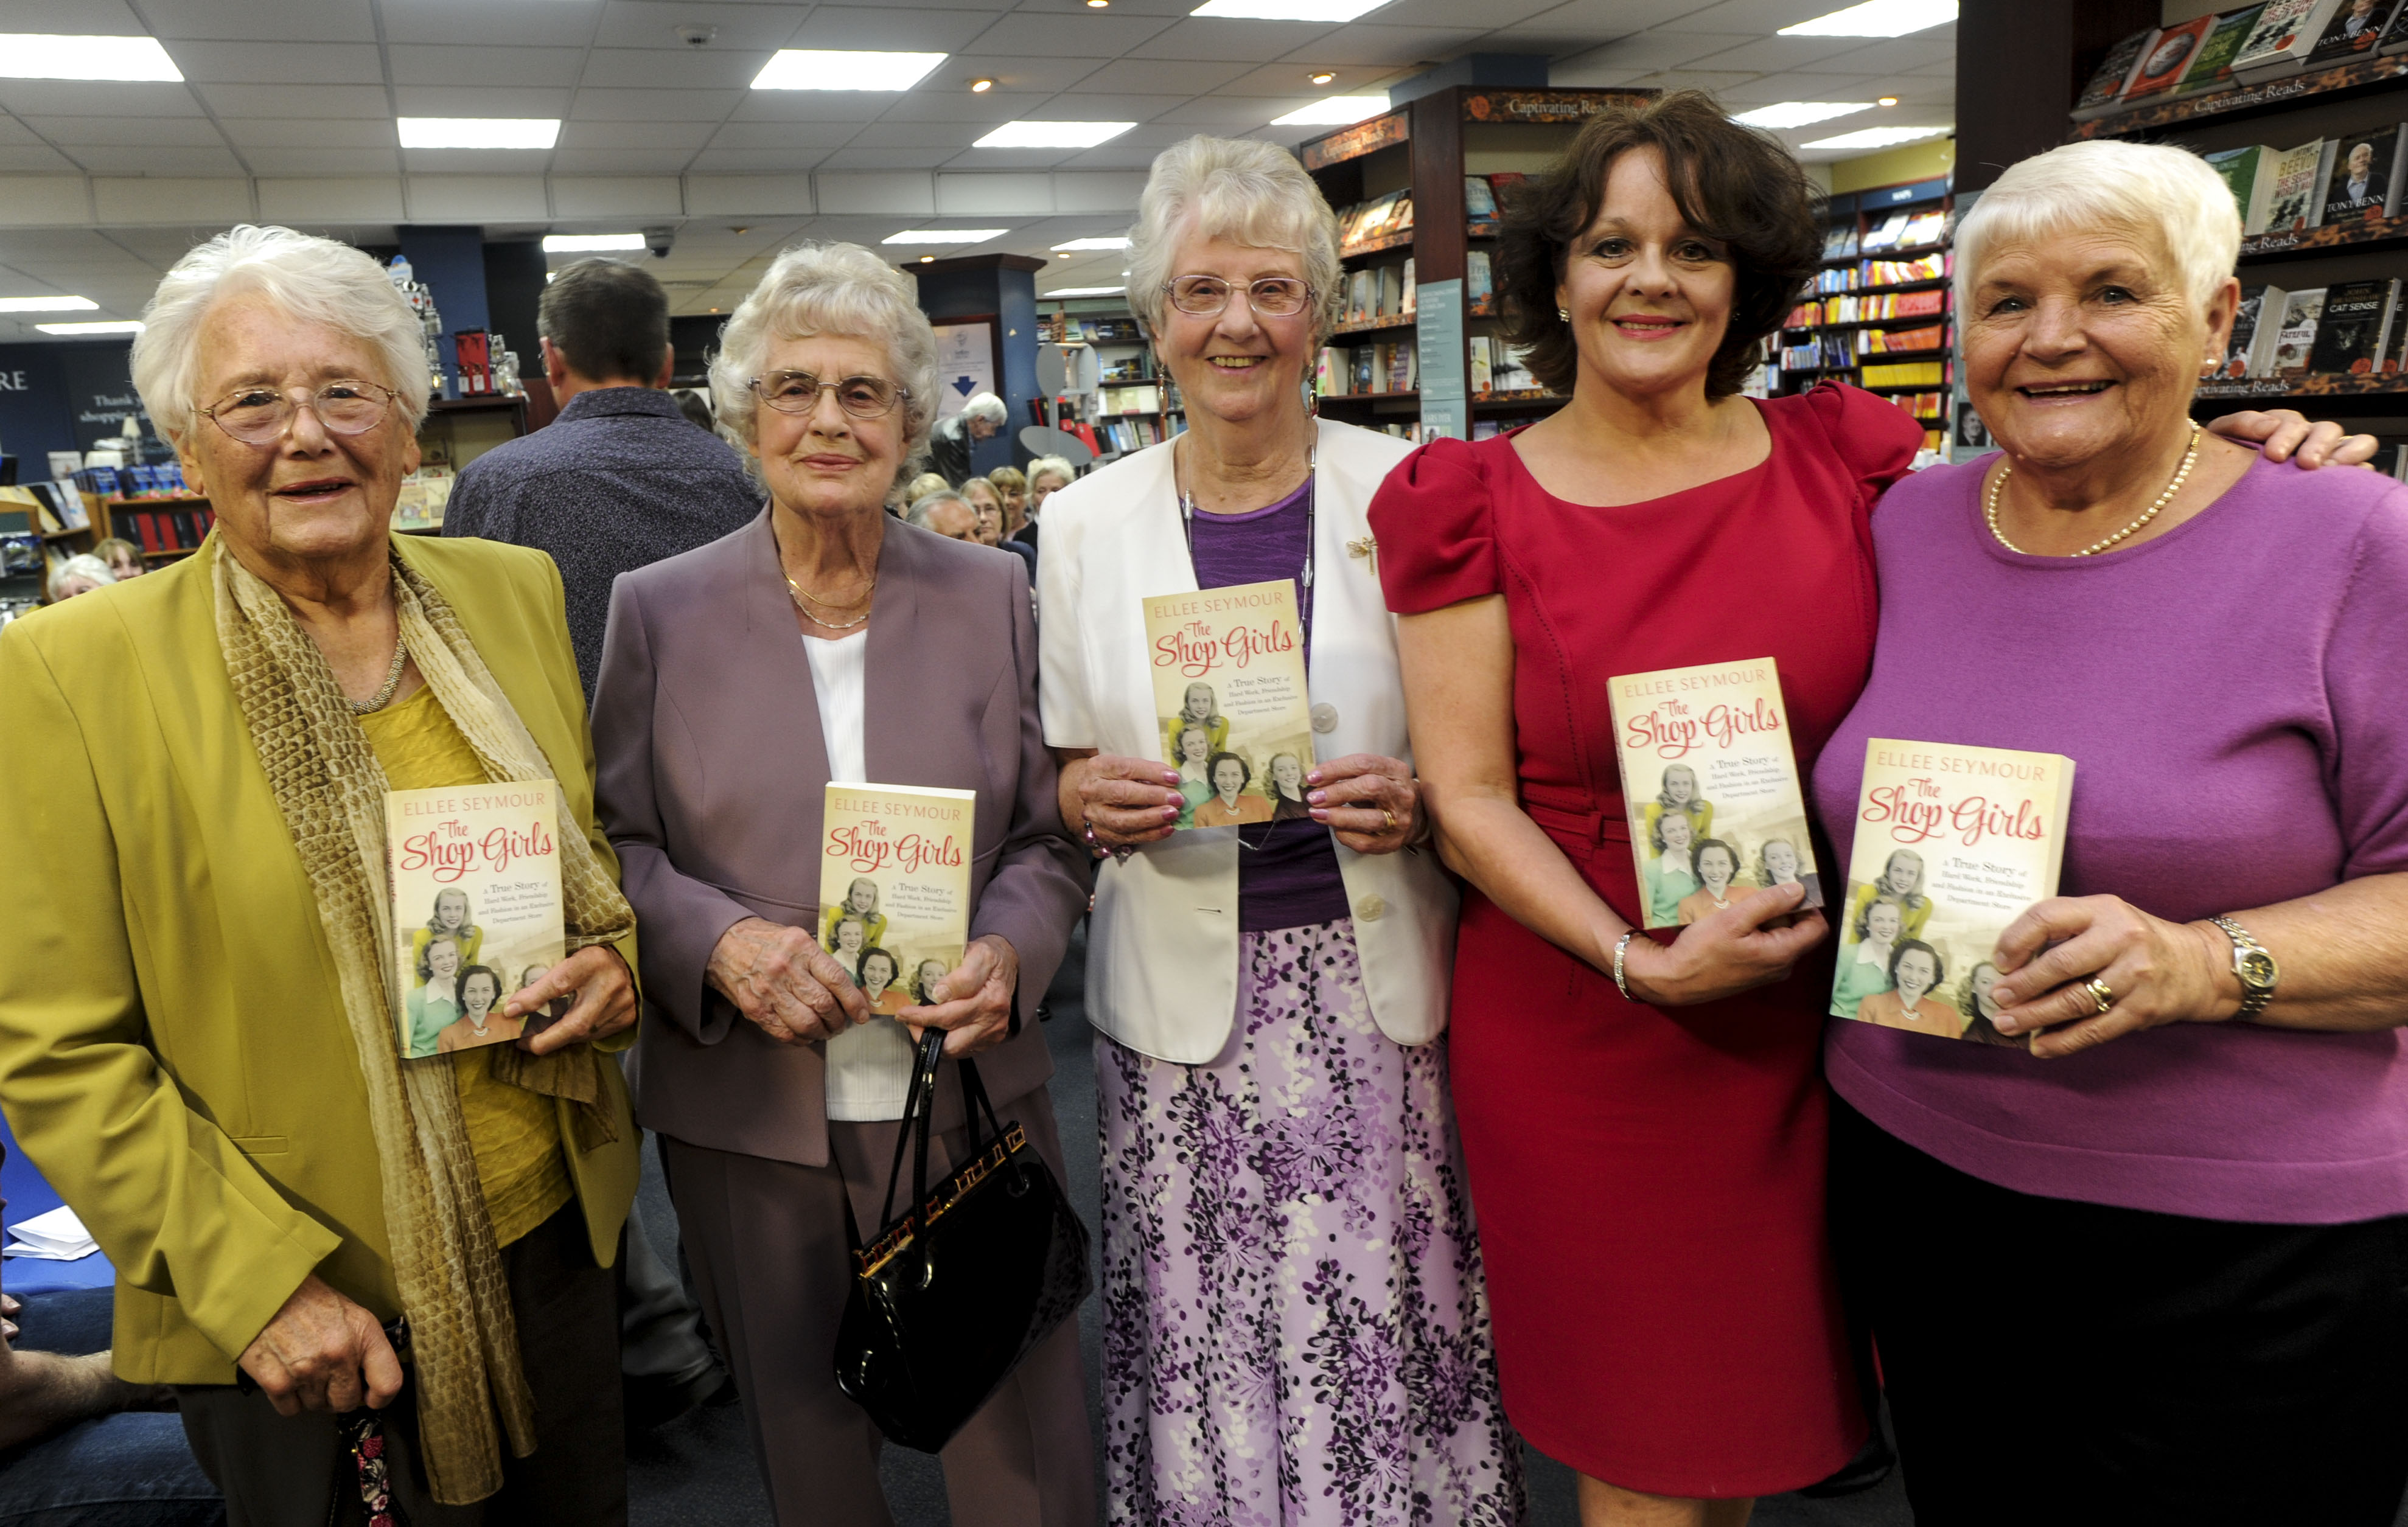 The Shop Girls launch at Heffers makes history